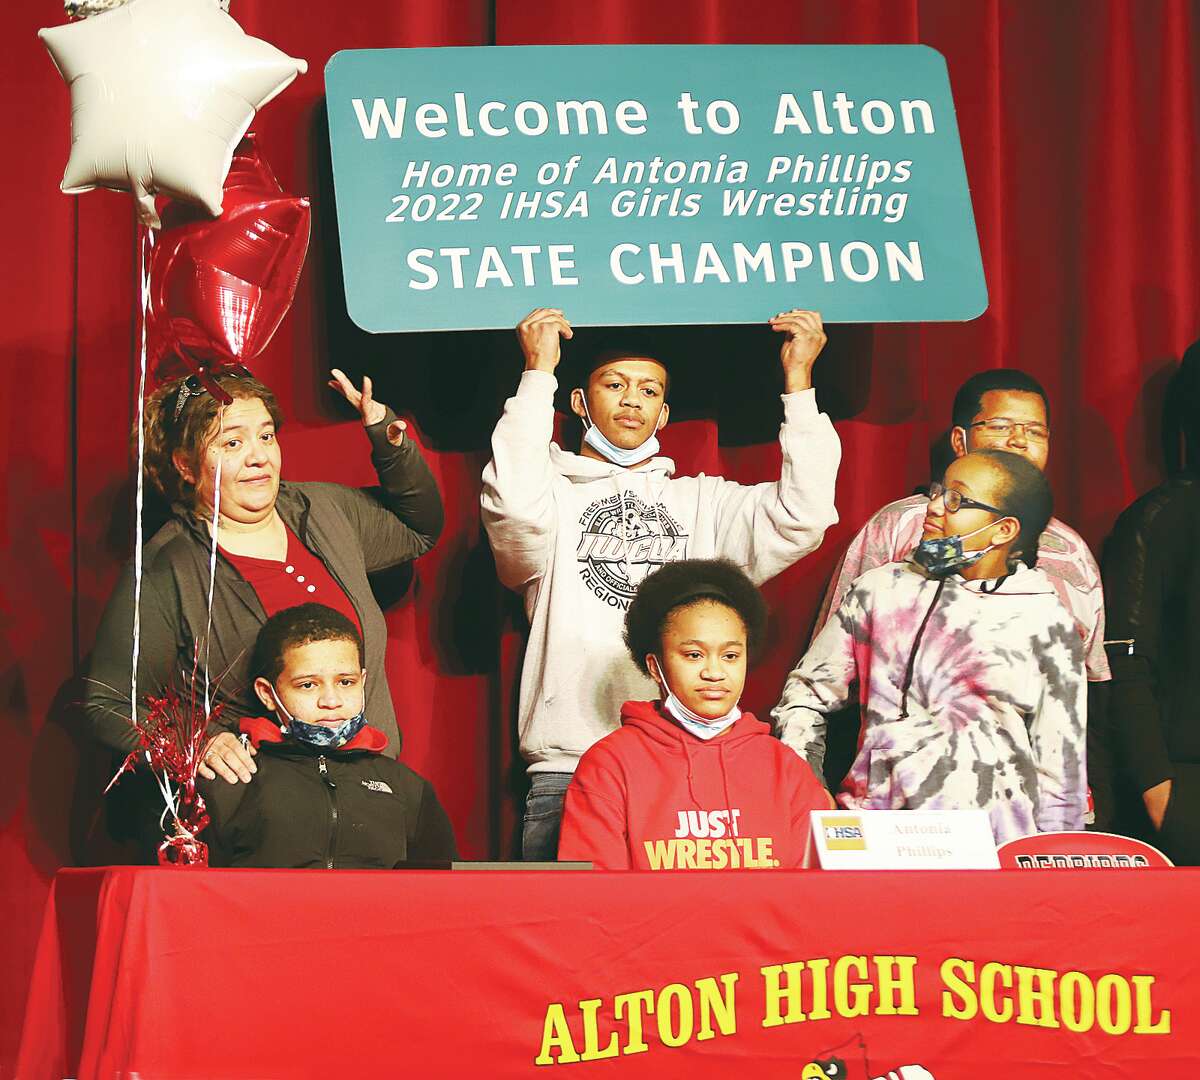 John Badman|The Telegraph IHSA state champion wrestler Antonia Phillips, center, poses for a picture with her family, including her mother, Lupe Phillips, left, as they hold a sign celebrating her accomplishment. Alton Mayor David Goins wants to put similar signs up on each highway entry point into the city.